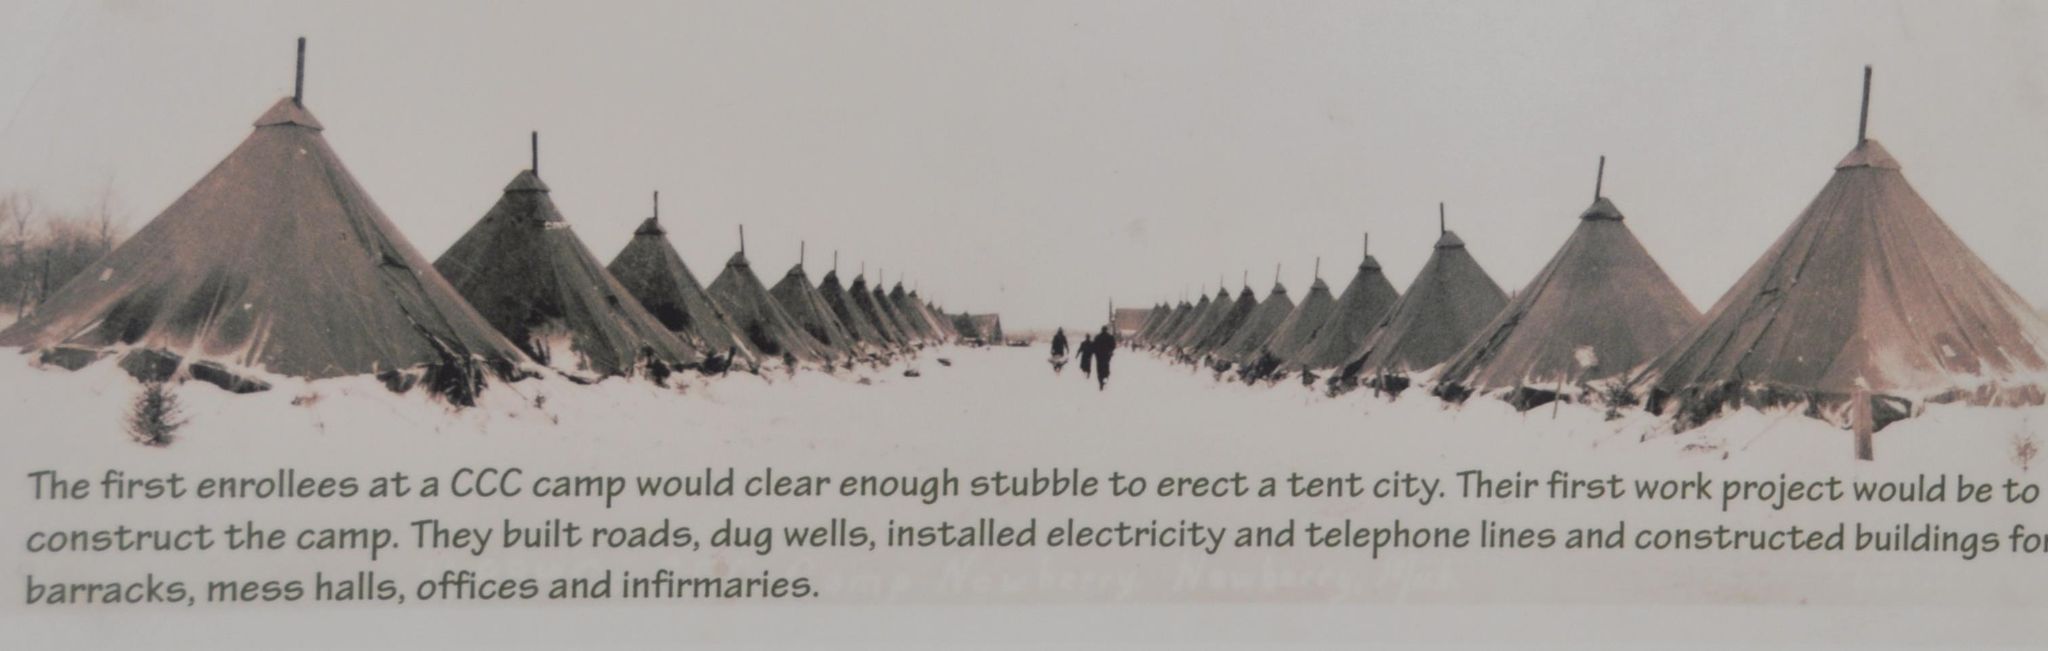 CCC Museum (Tents in Winter), Roscommon,  - 2014-08-04